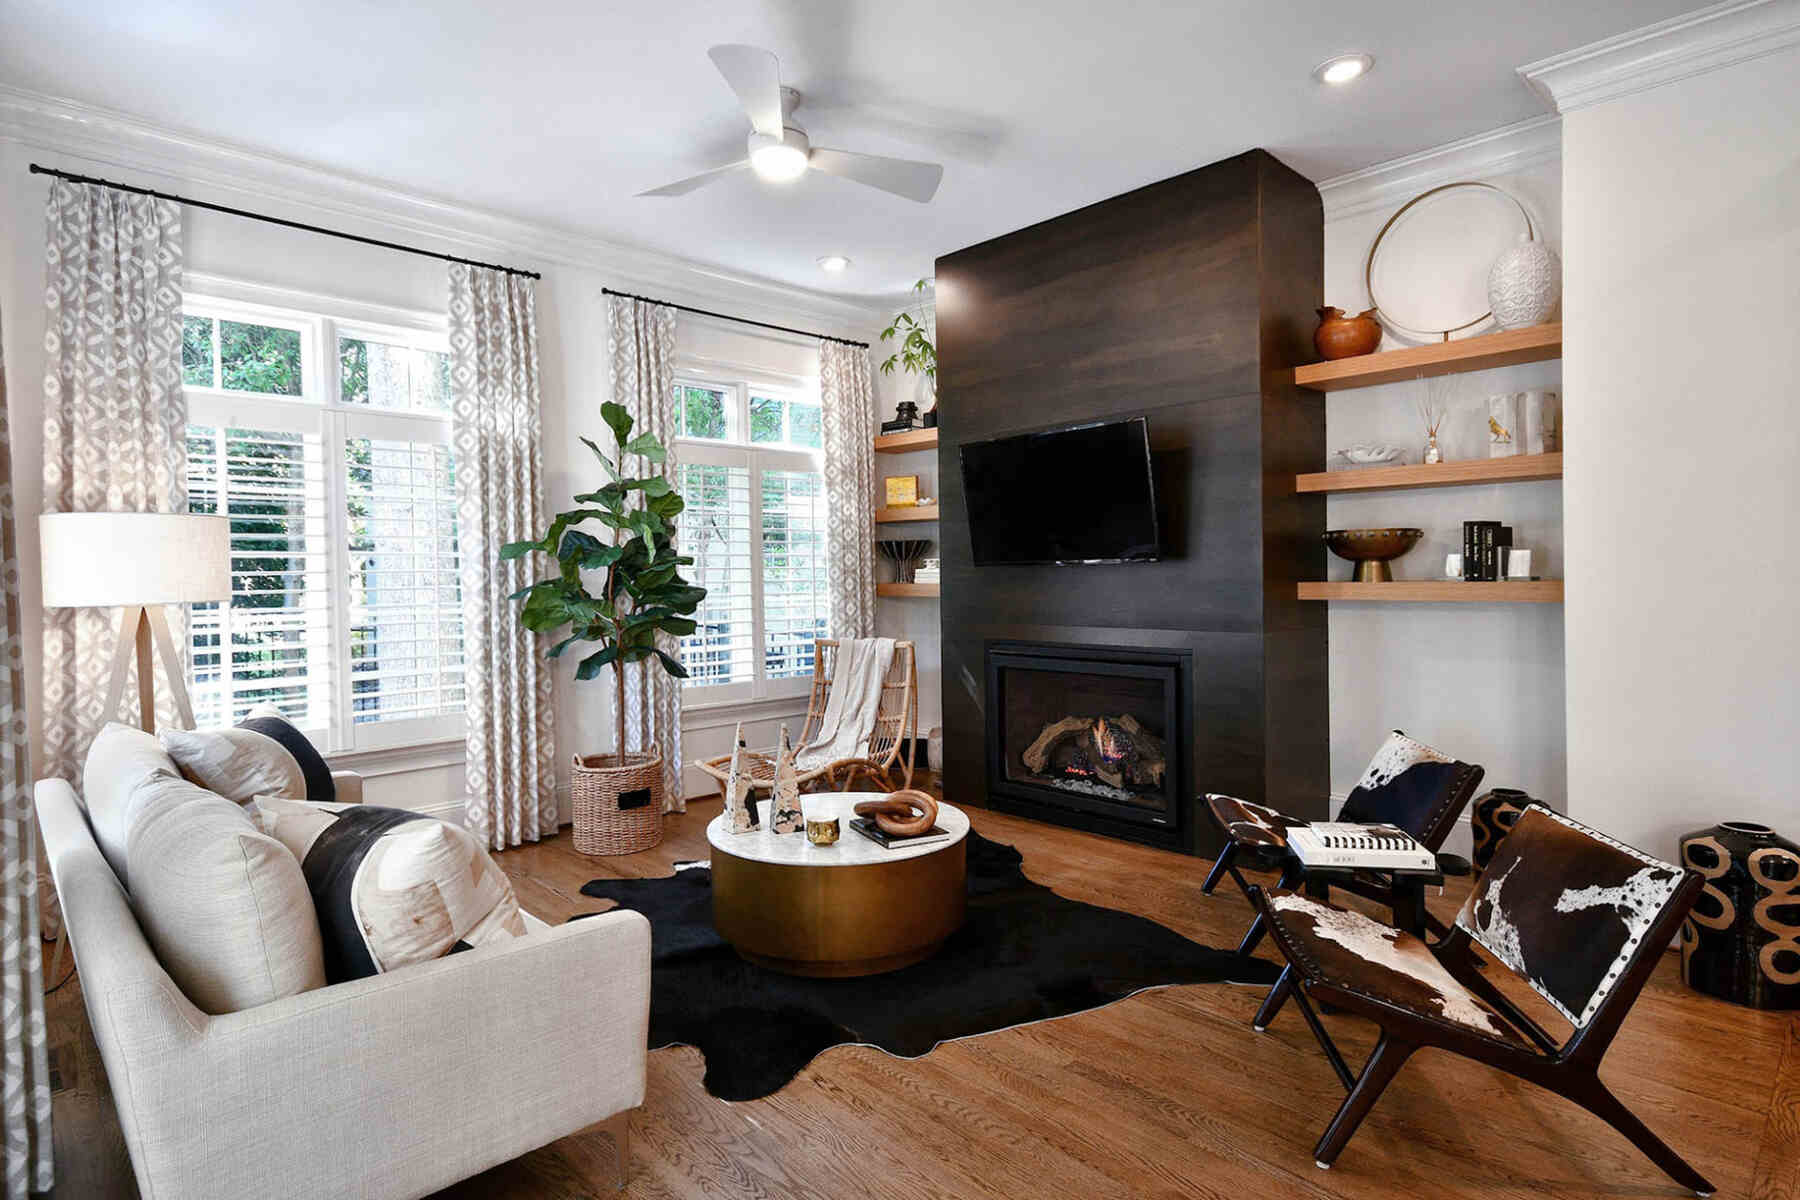 A living room with black fireplace, center table, sofa, chairs, and indoor plant